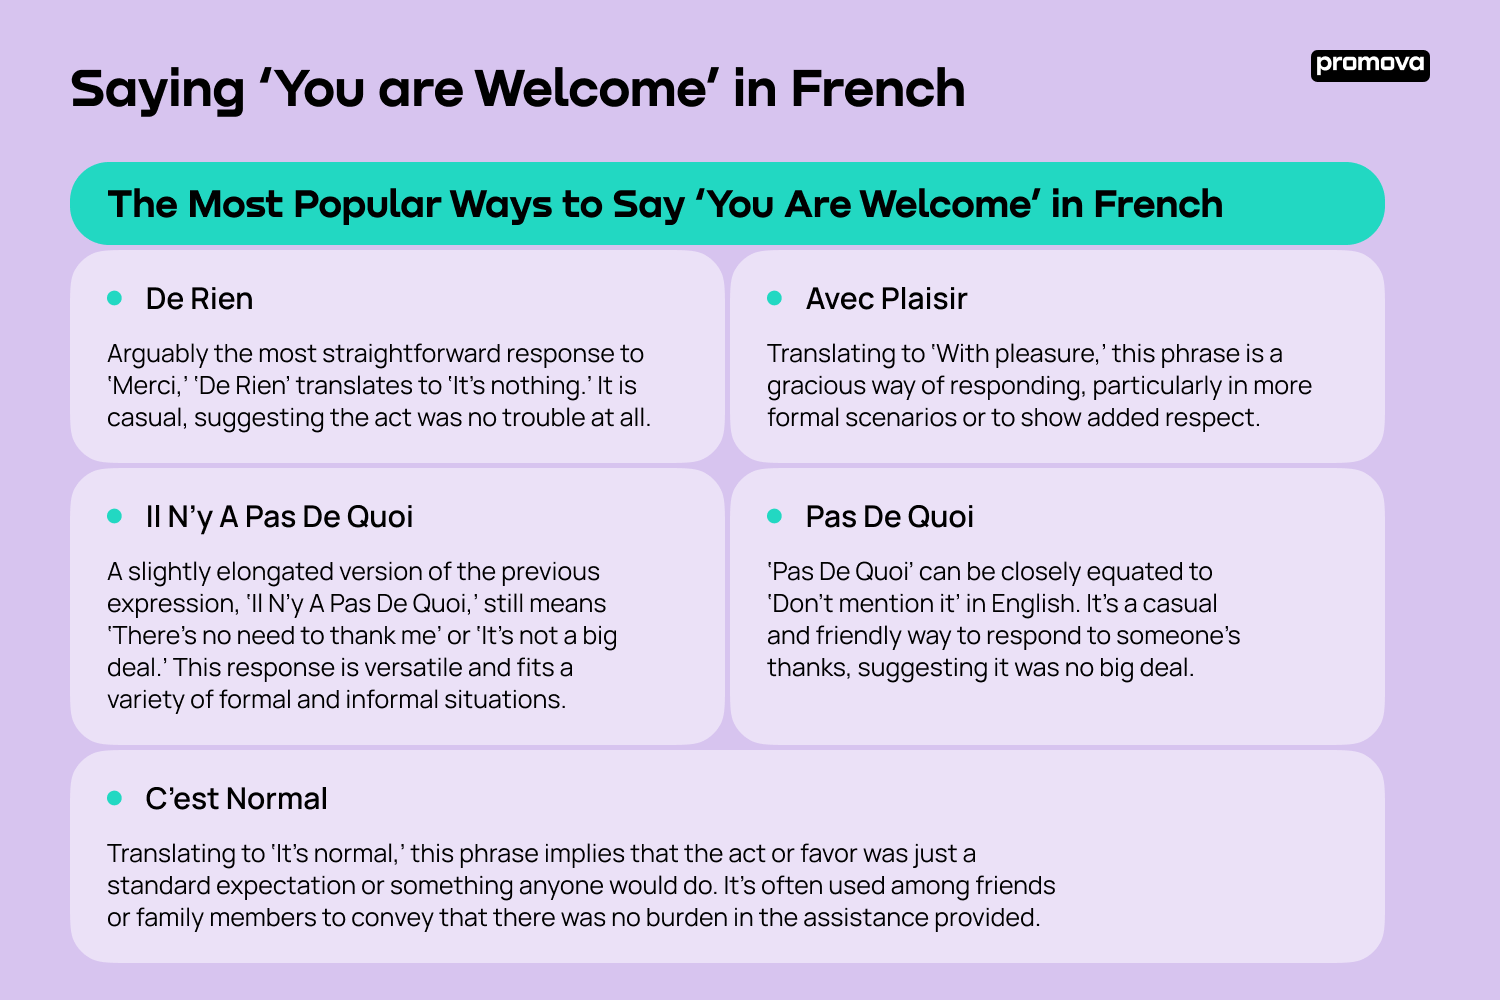 The Most Popular Ways to Say ‘You Are Welcome’ in French